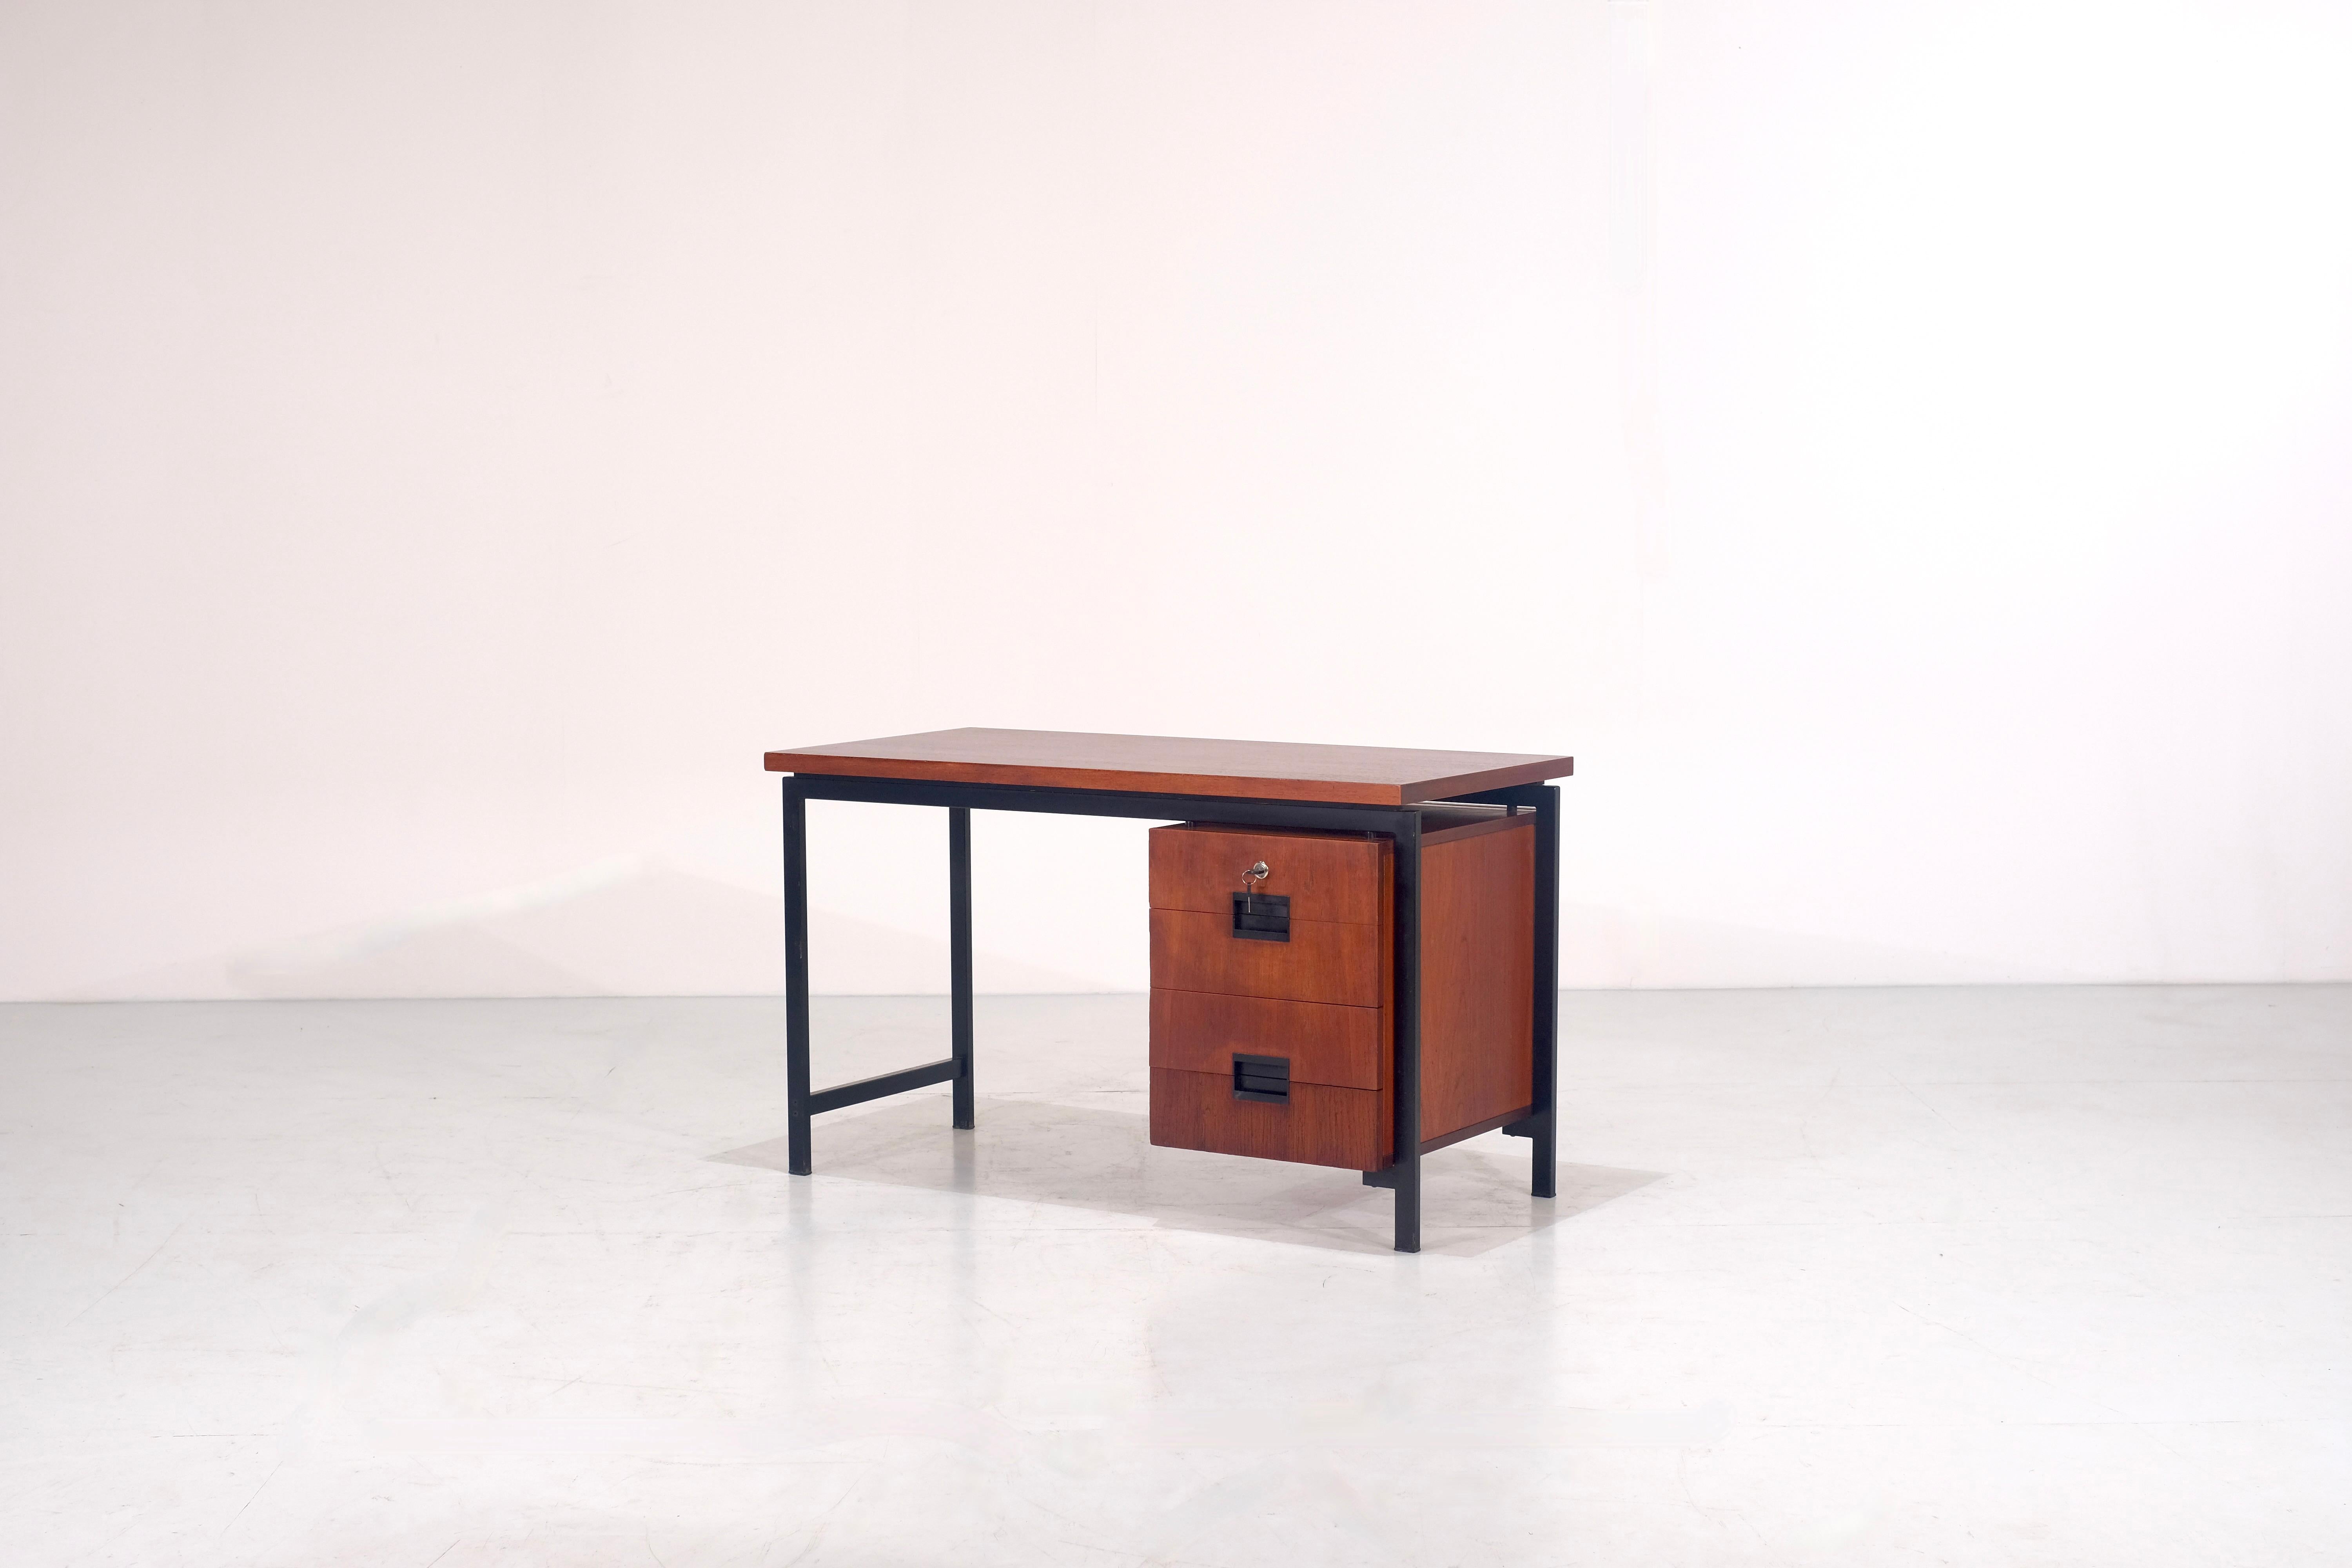 Nice office Desk model EU01 of the Japanese Series by Cees Braakman for Pastoe created between 1950 and 1960.
This desk is made of teak wood and has a black lacquered metal frame. The handles are made of black moulded plastic and It has four drawers